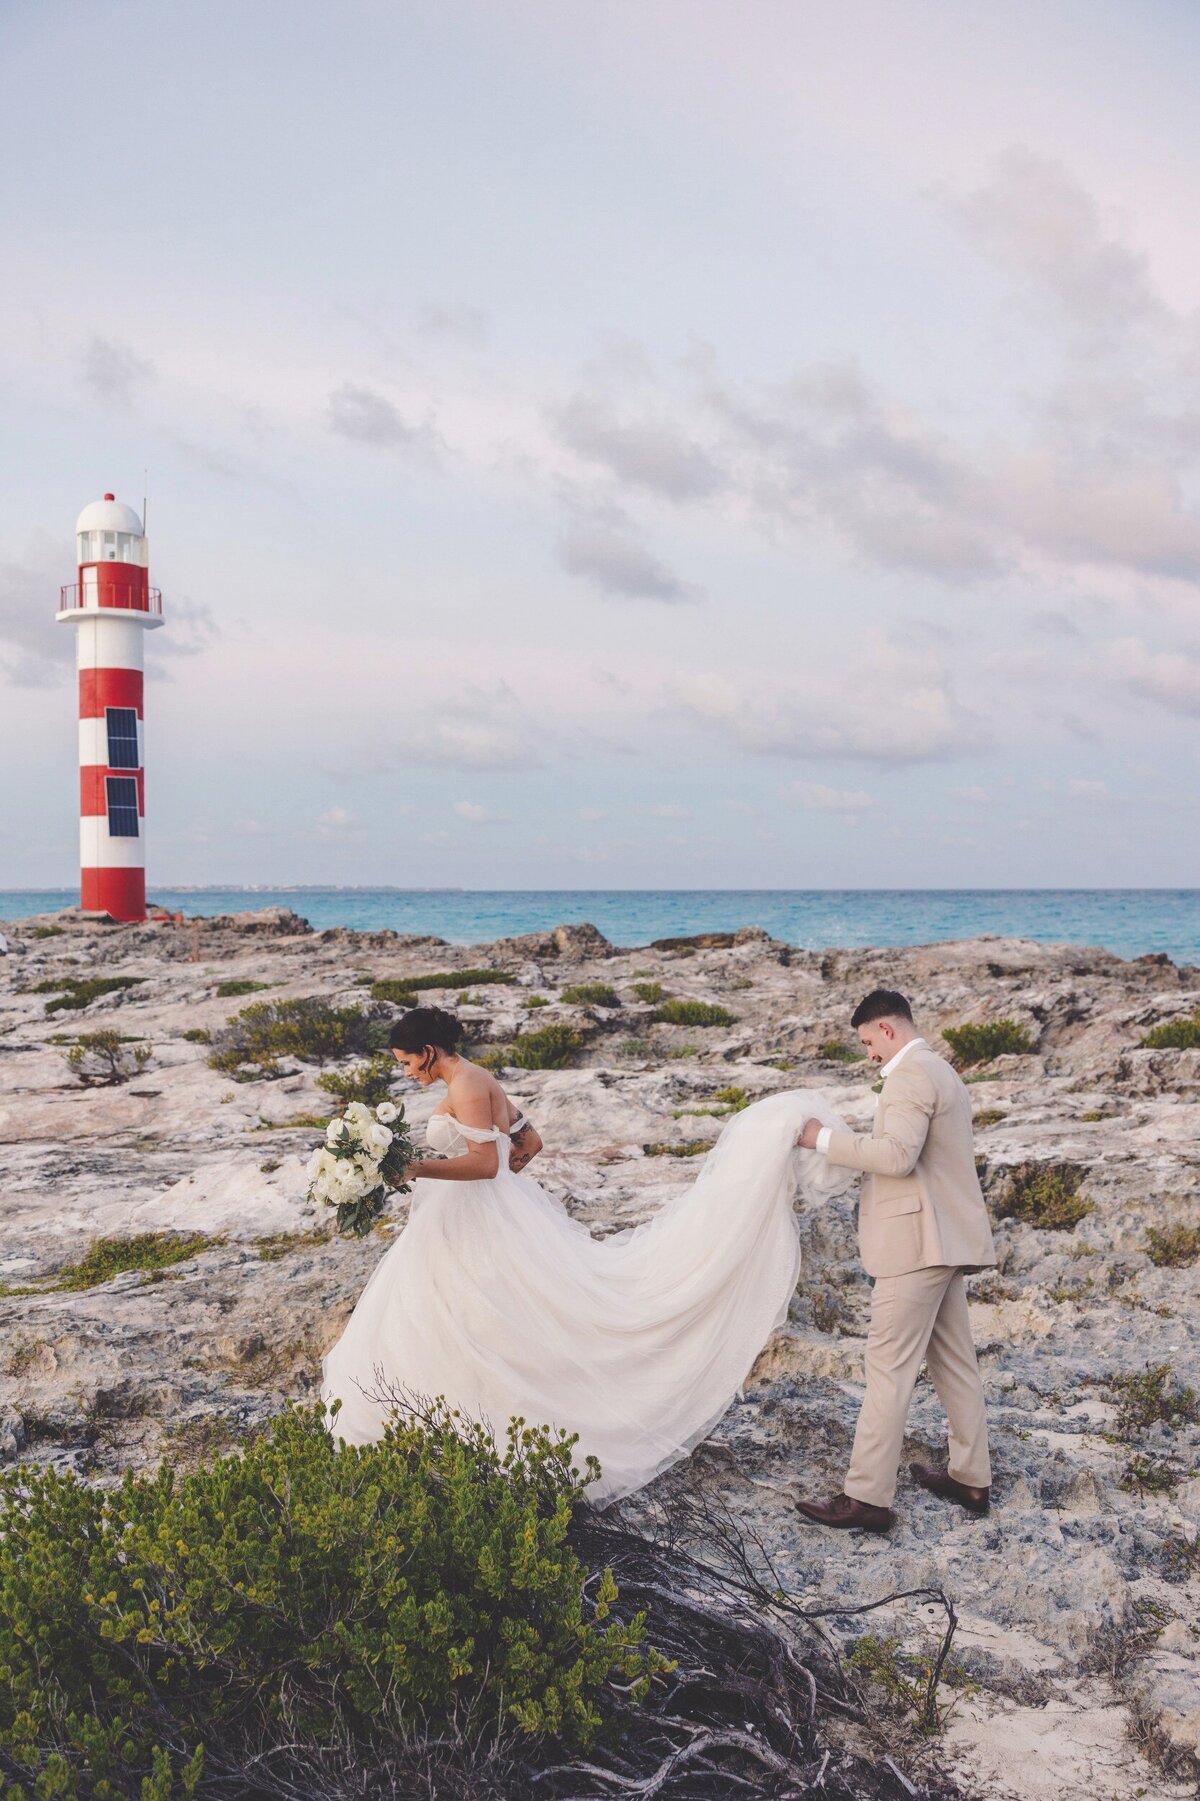 Groom helping bride with dress in front of the lighthouse at Hyatt Ziva Cancun